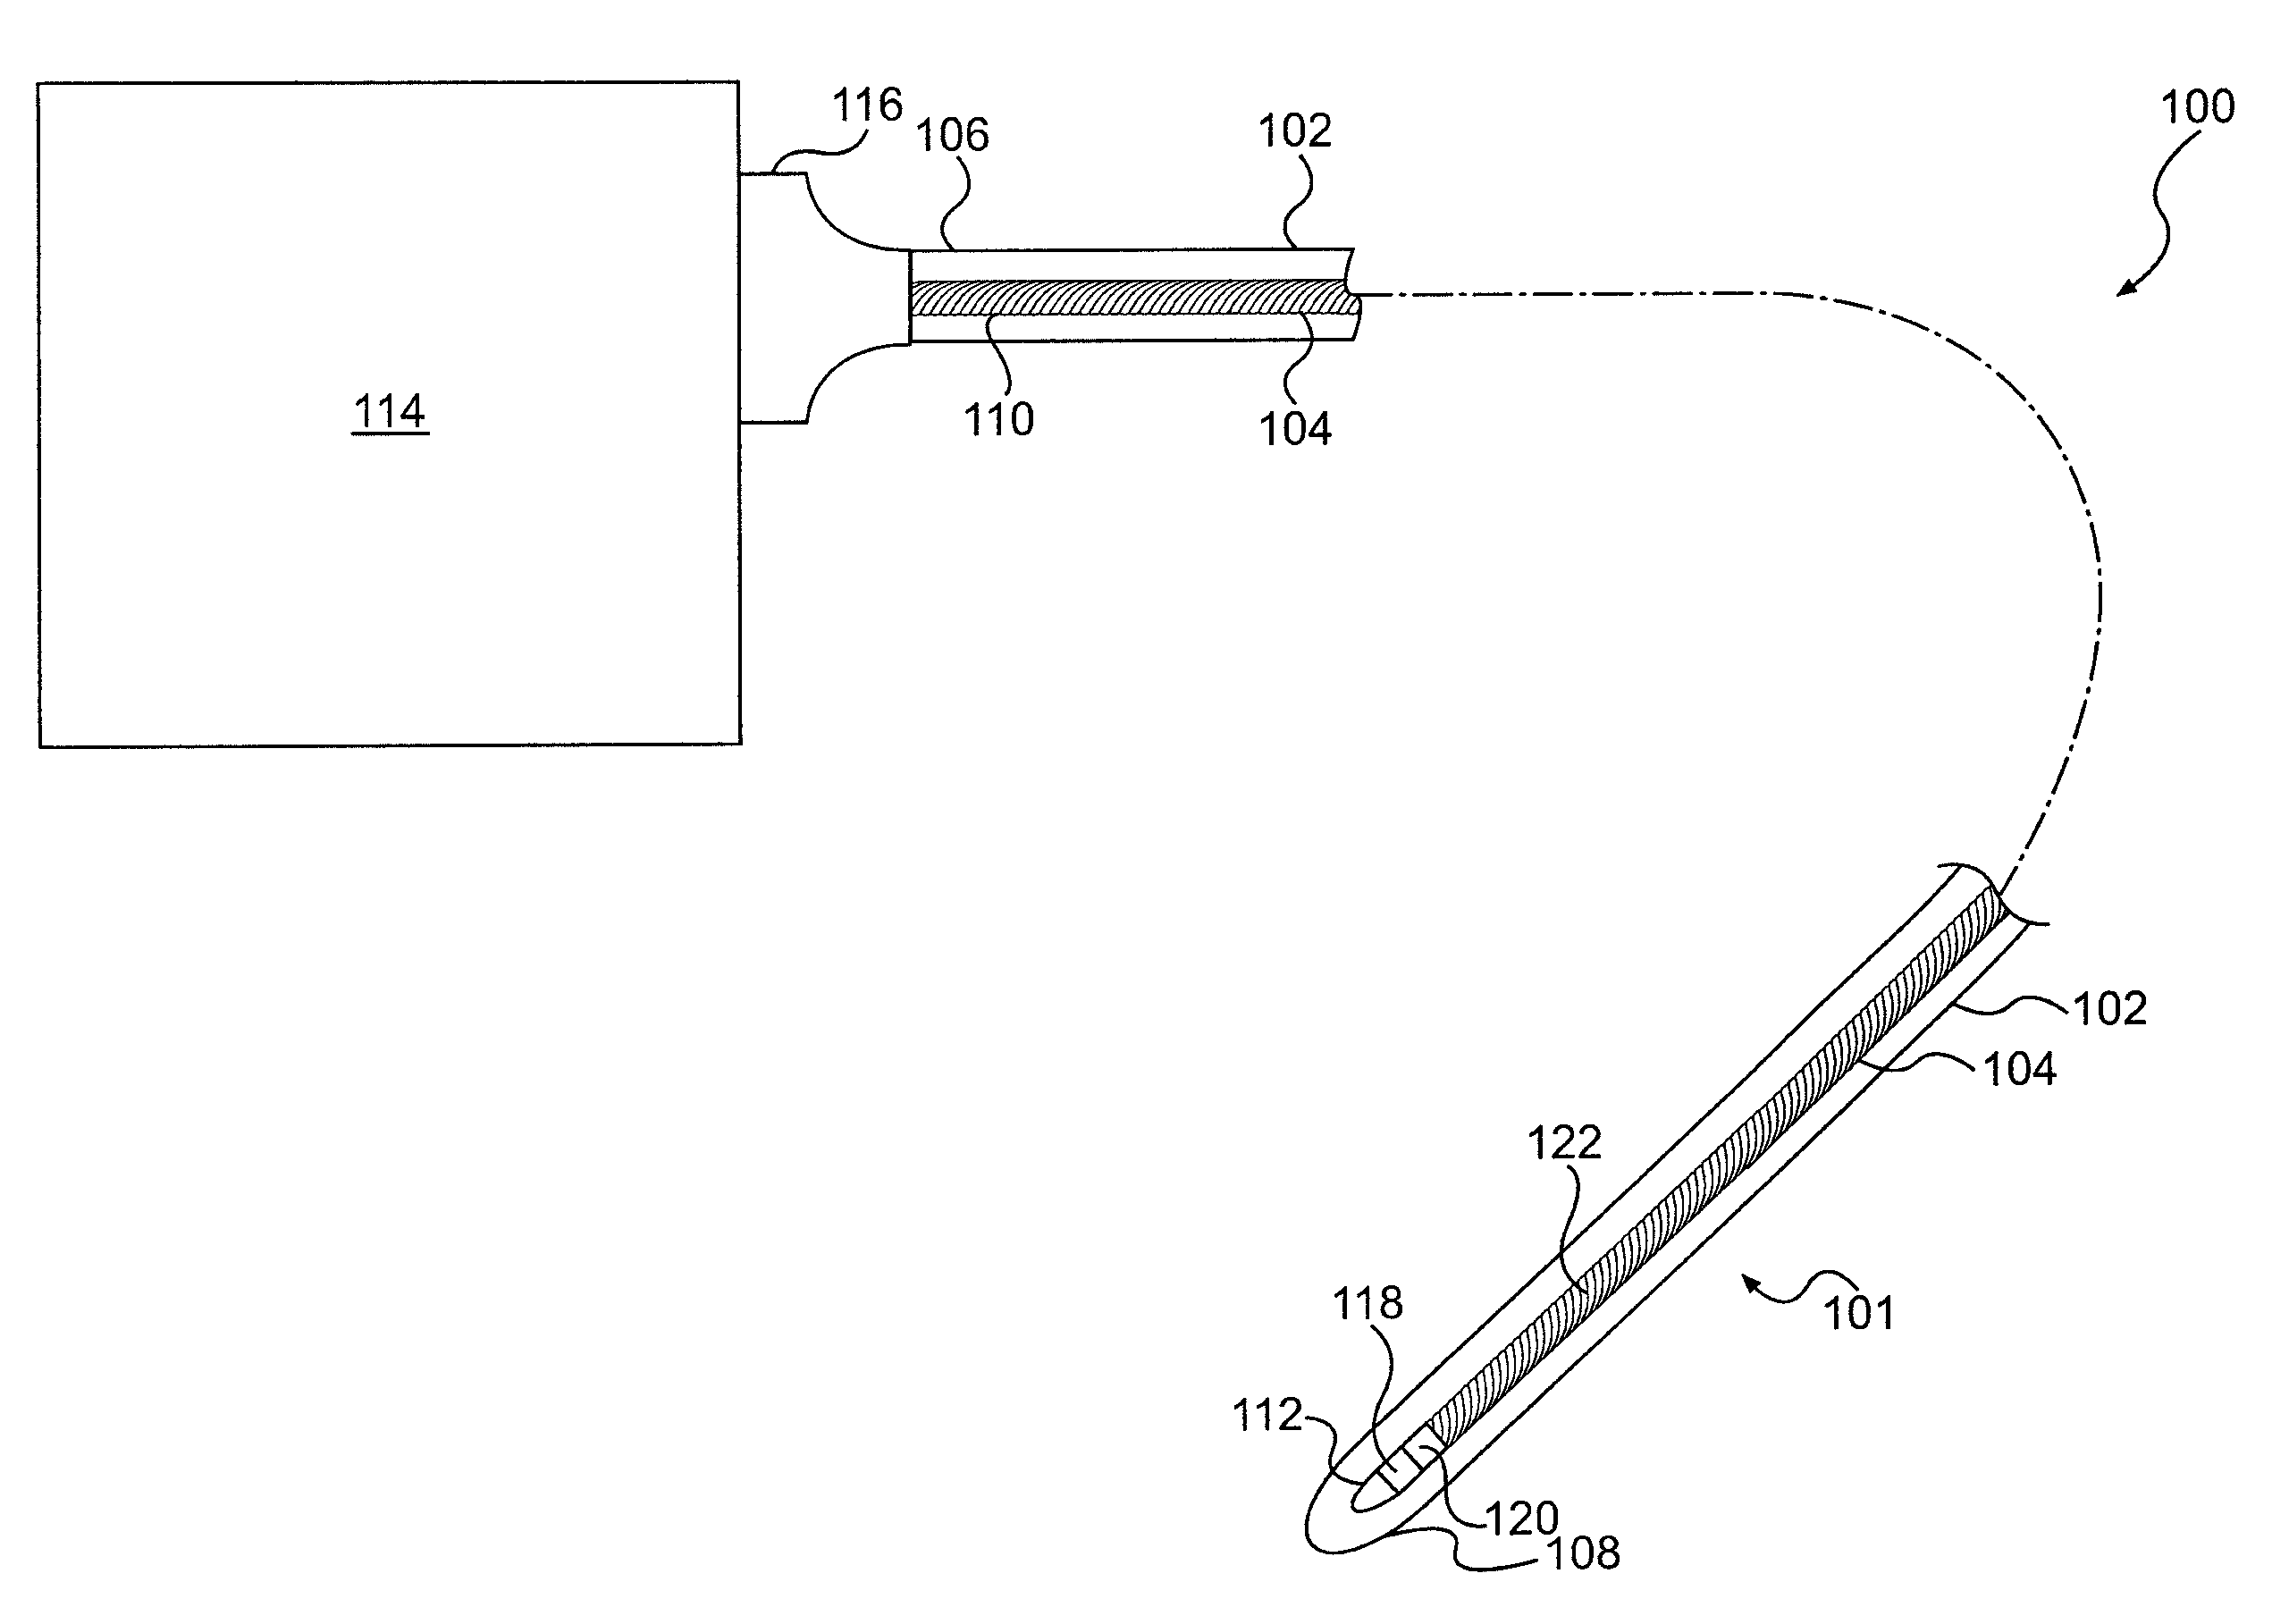 Rotational intravascular ultrasound probe with an active spinning element